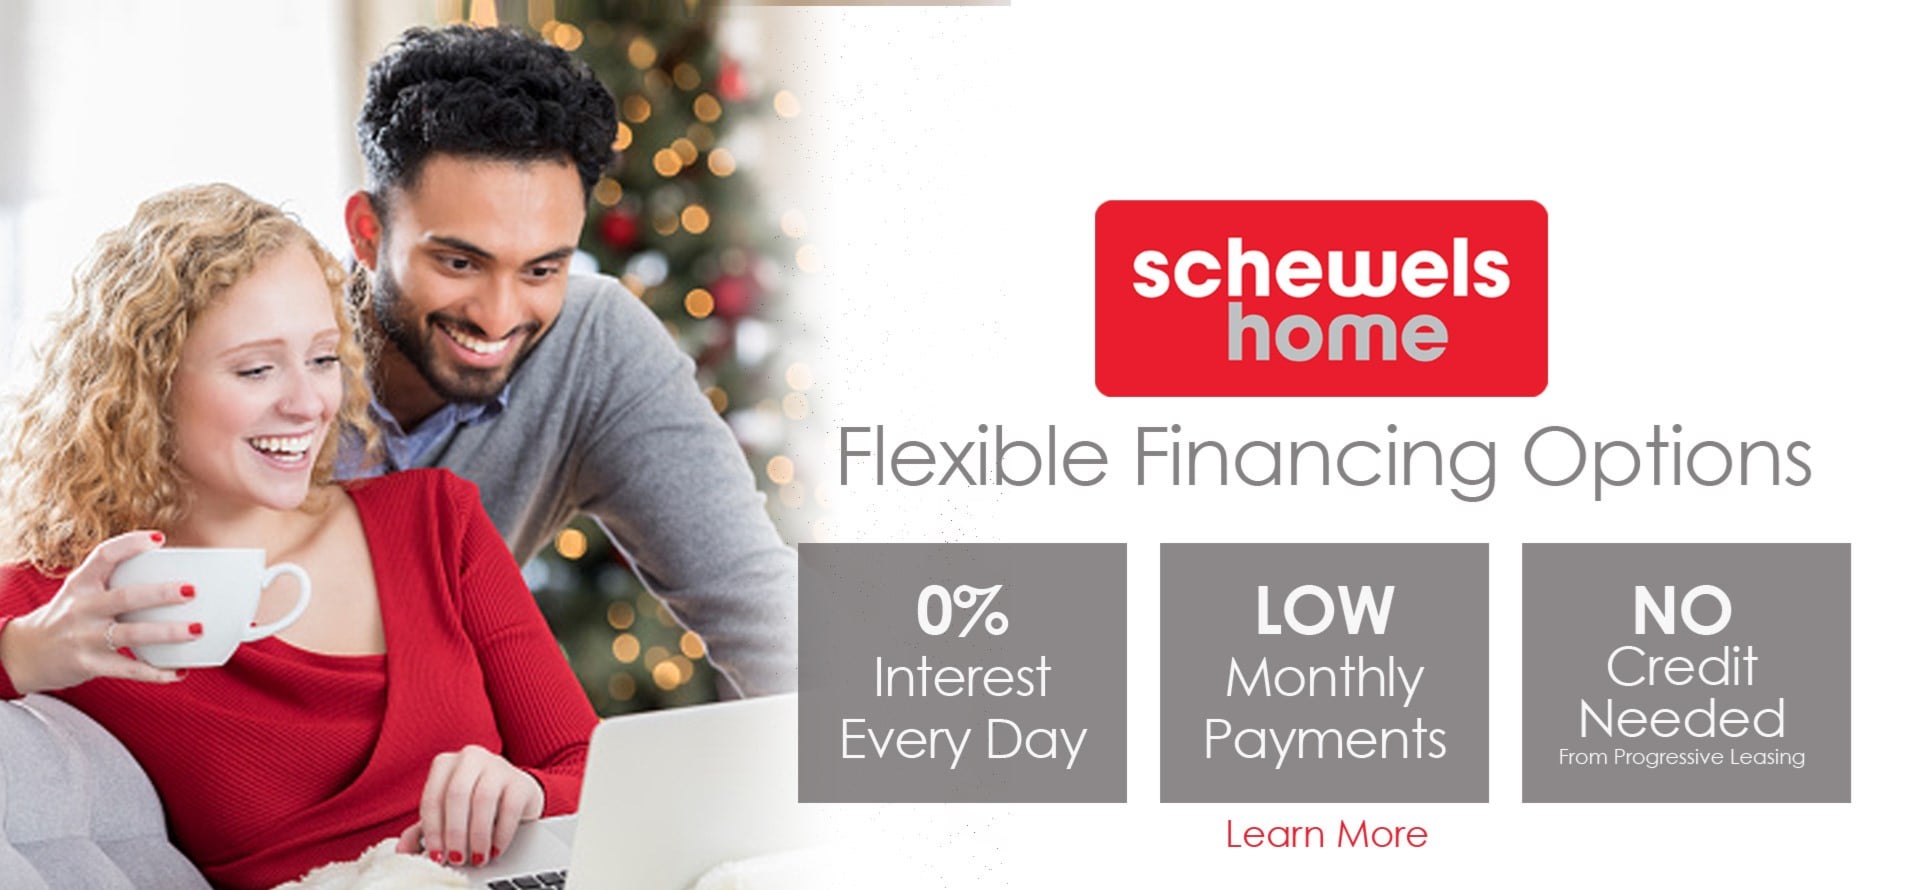 Flexible Financing Options | 0% Interest Every Day | Low Monthly Payments | No Credit Needed from Progressive Leasing | Learn More >